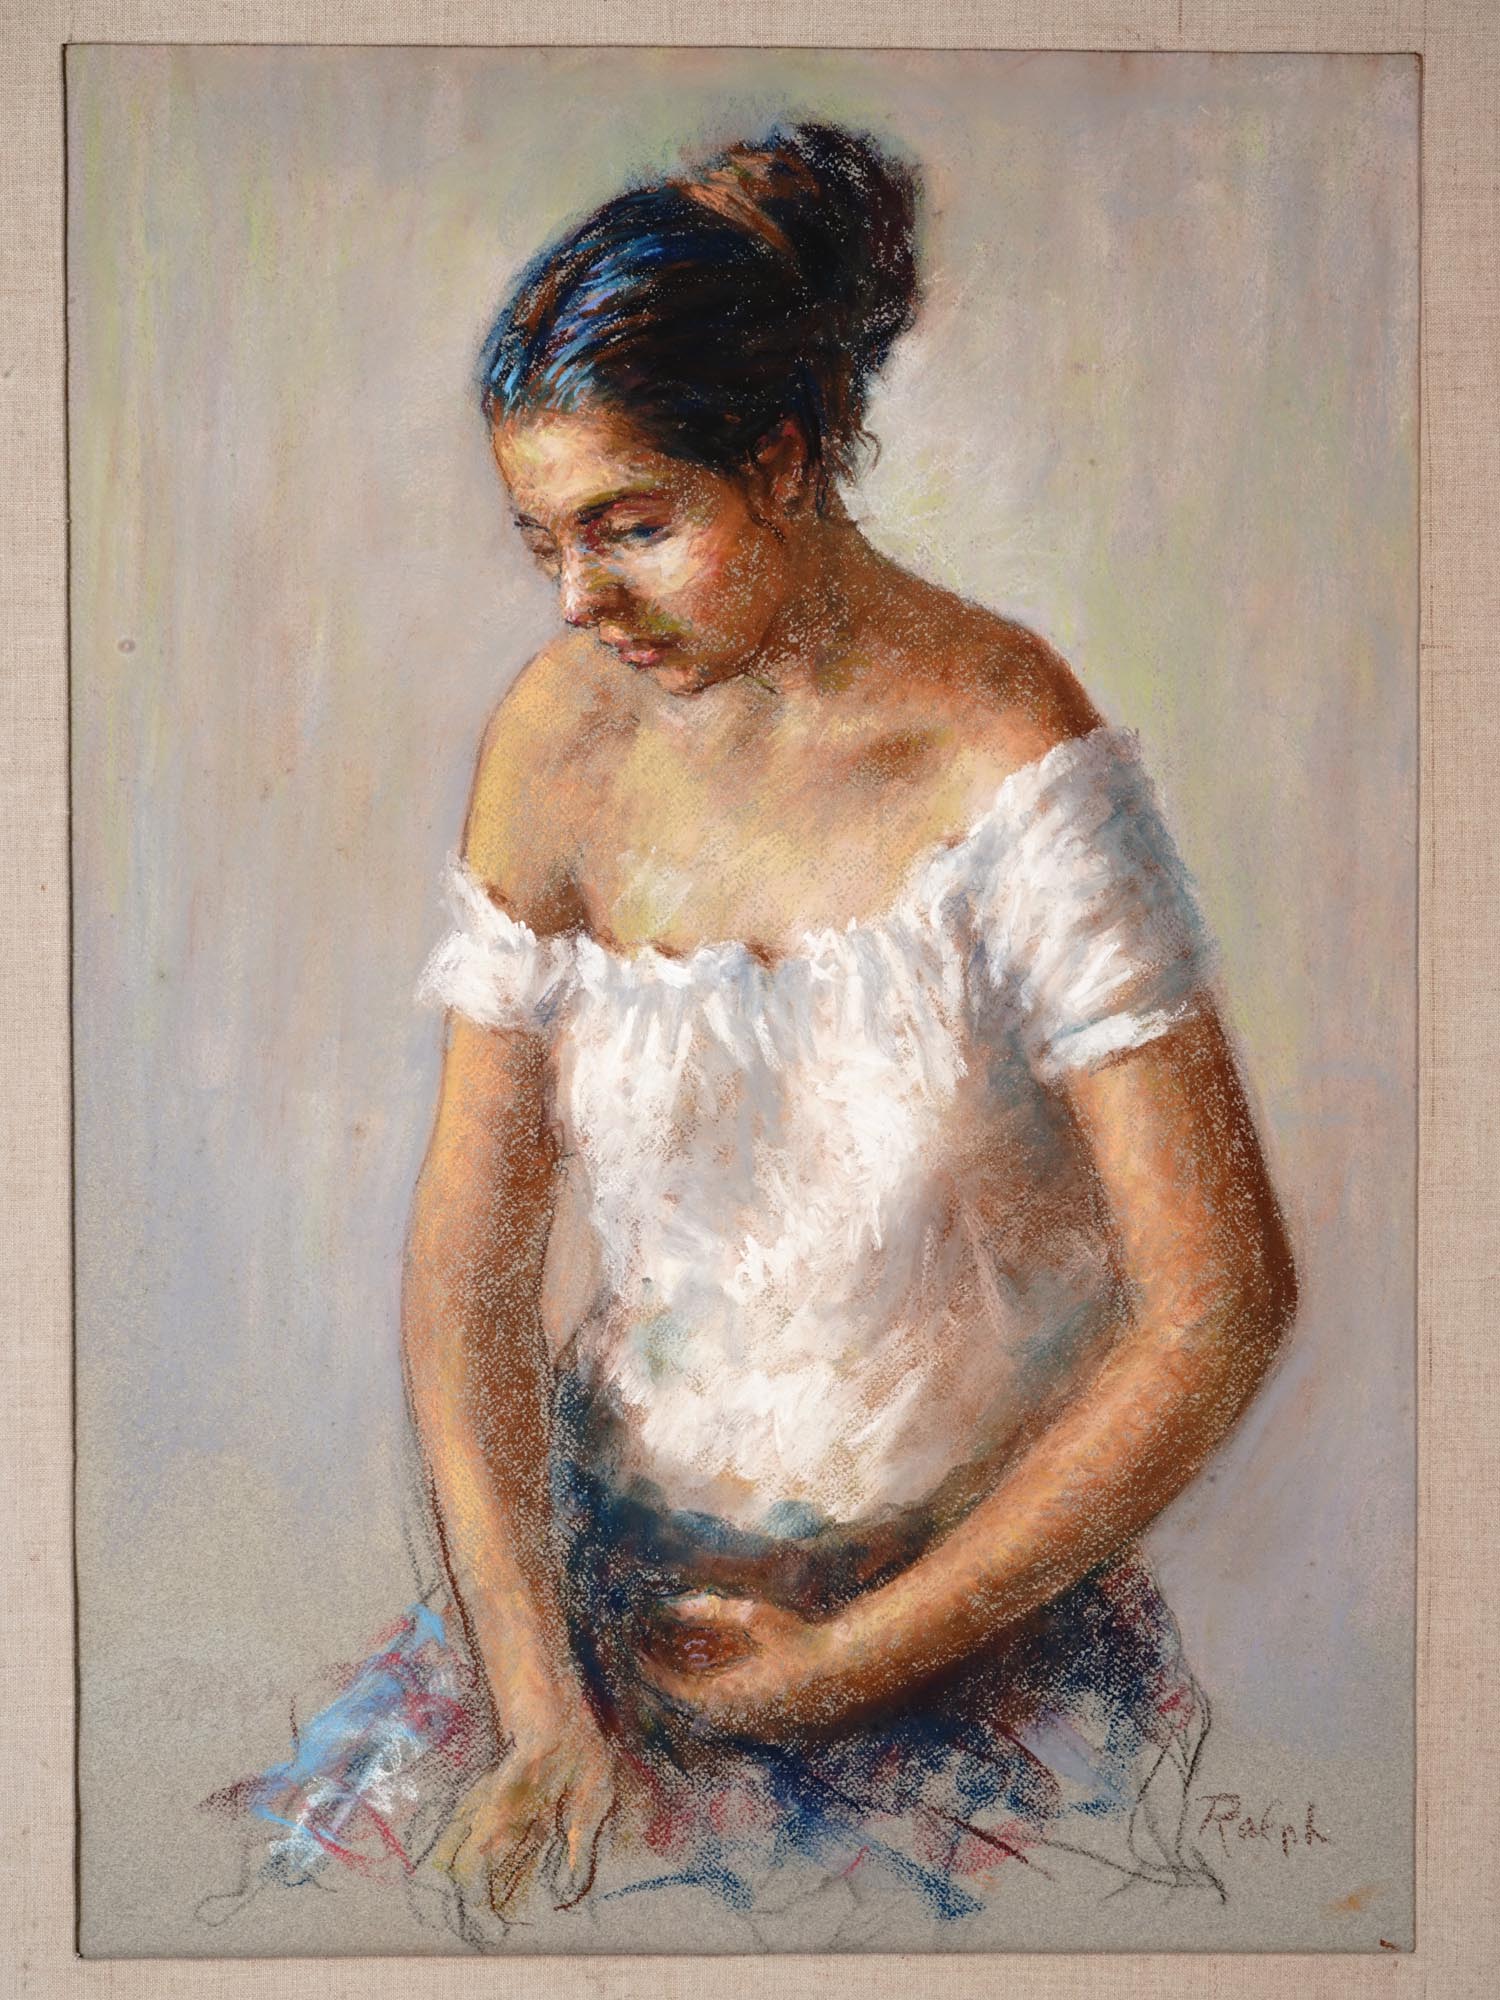 GIRL PORTRAIT PASTEL PAINTING ATTR TO RALPH AVERY PIC-1